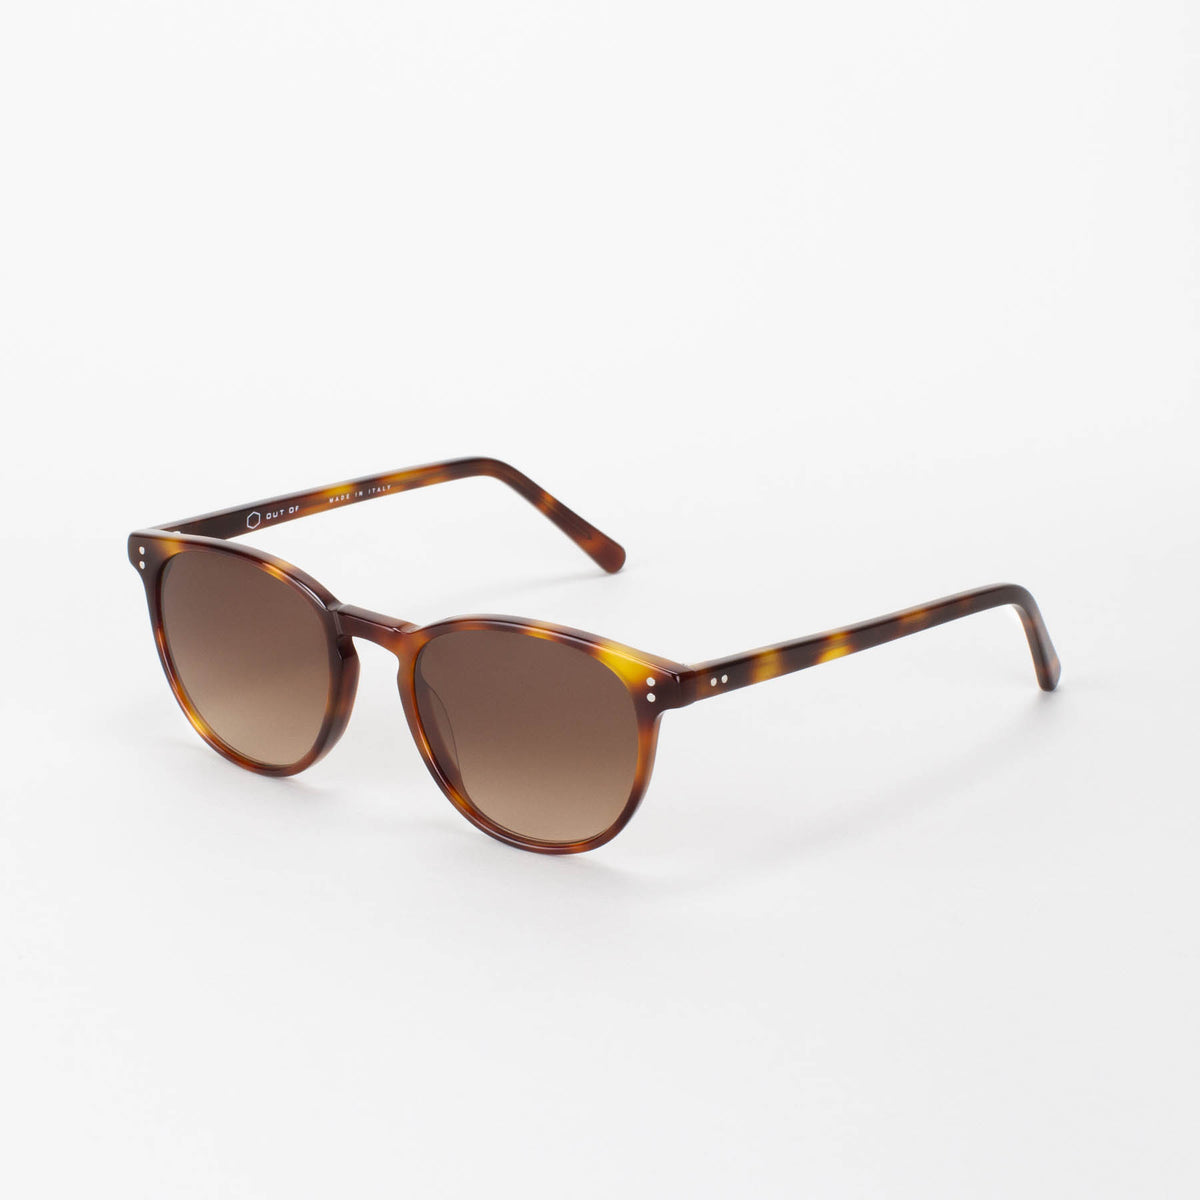 'OUT OF' RIVA TURTLE GRADIENT SUNGLASSES PROSPECTIVE